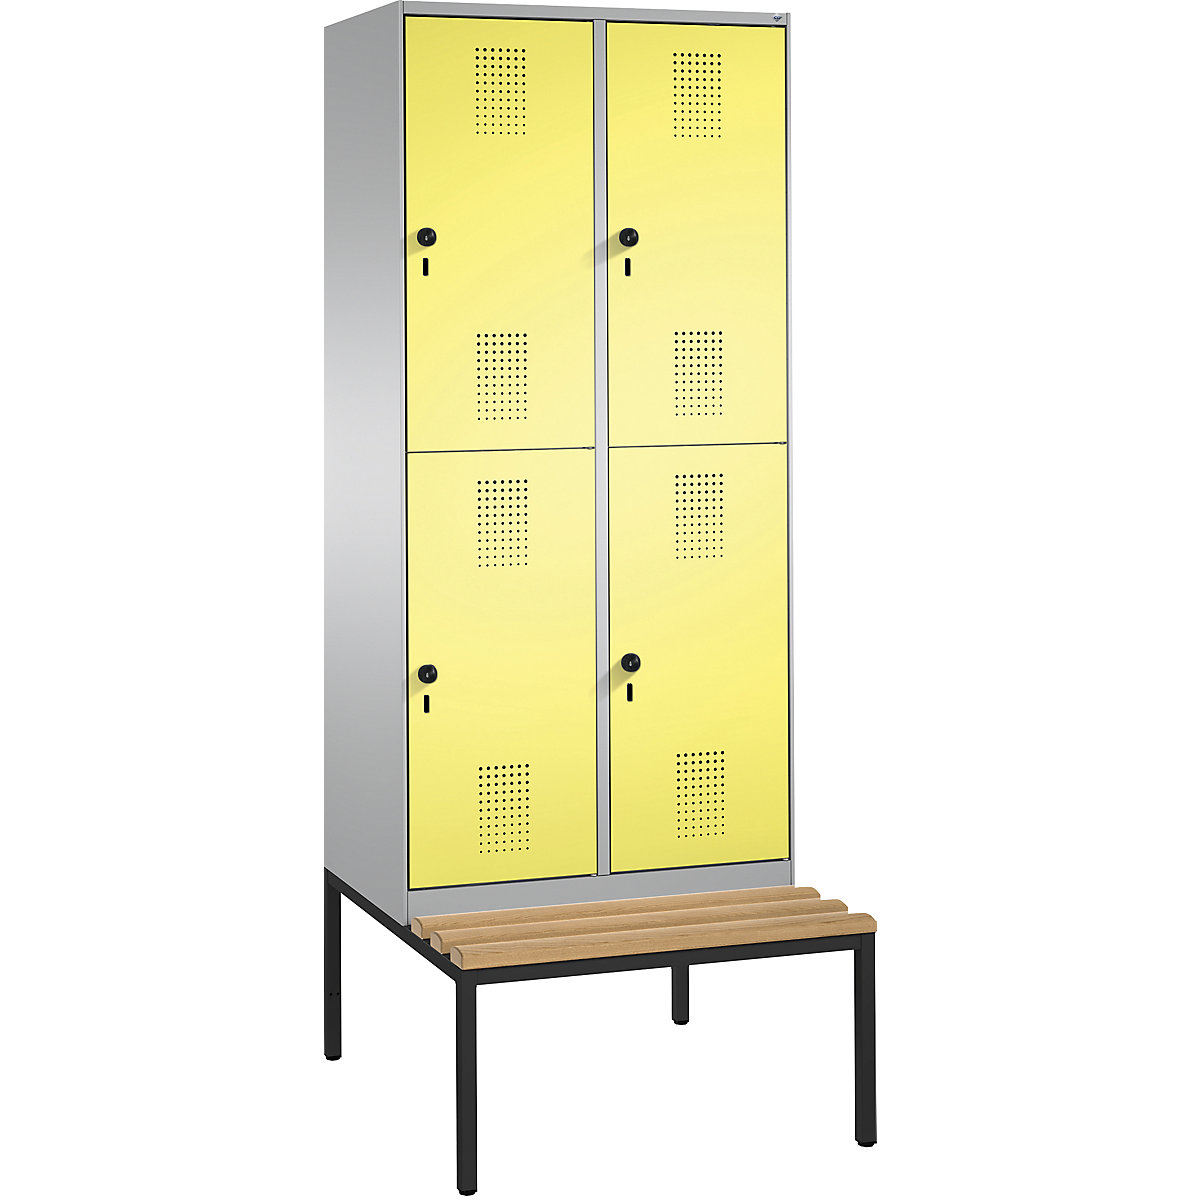 EVOLO cloakroom locker, double tier, with bench – C+P, 2 compartments, 2 shelf compartments each, compartment width 400 mm, white aluminium / sulphur yellow-16